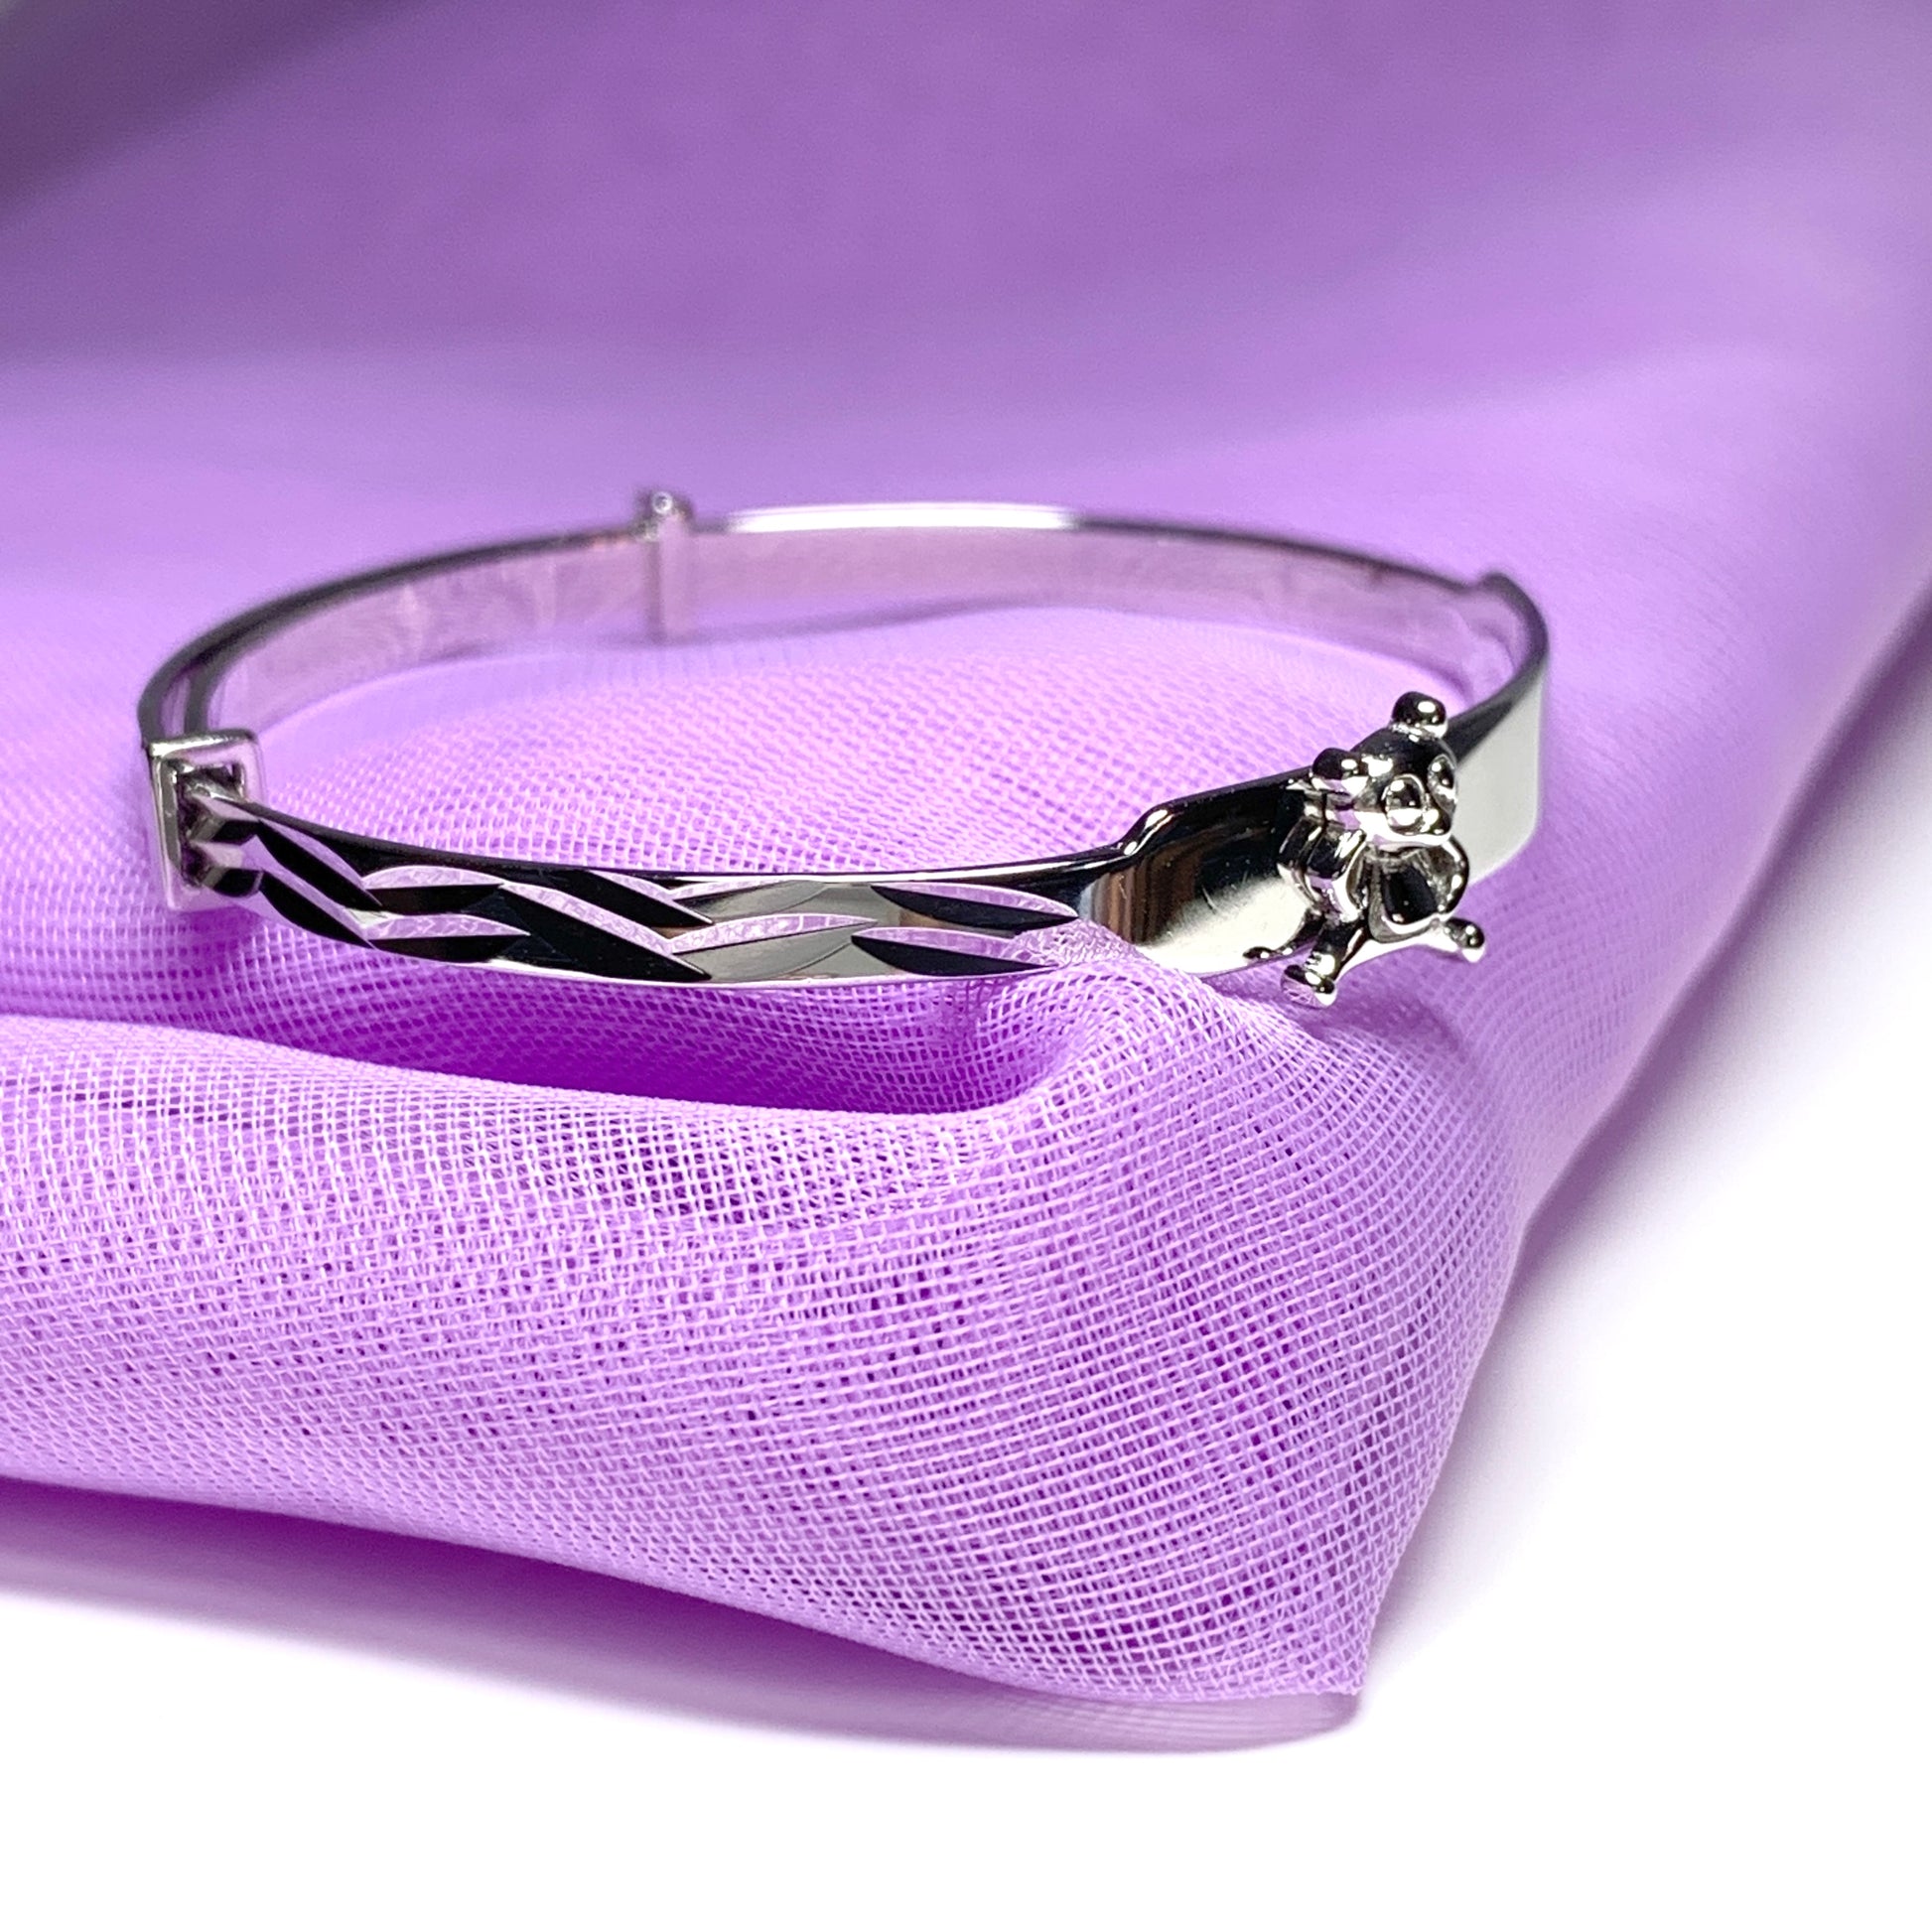 Child’s expanding bangle with a teddy bear design sterling silver